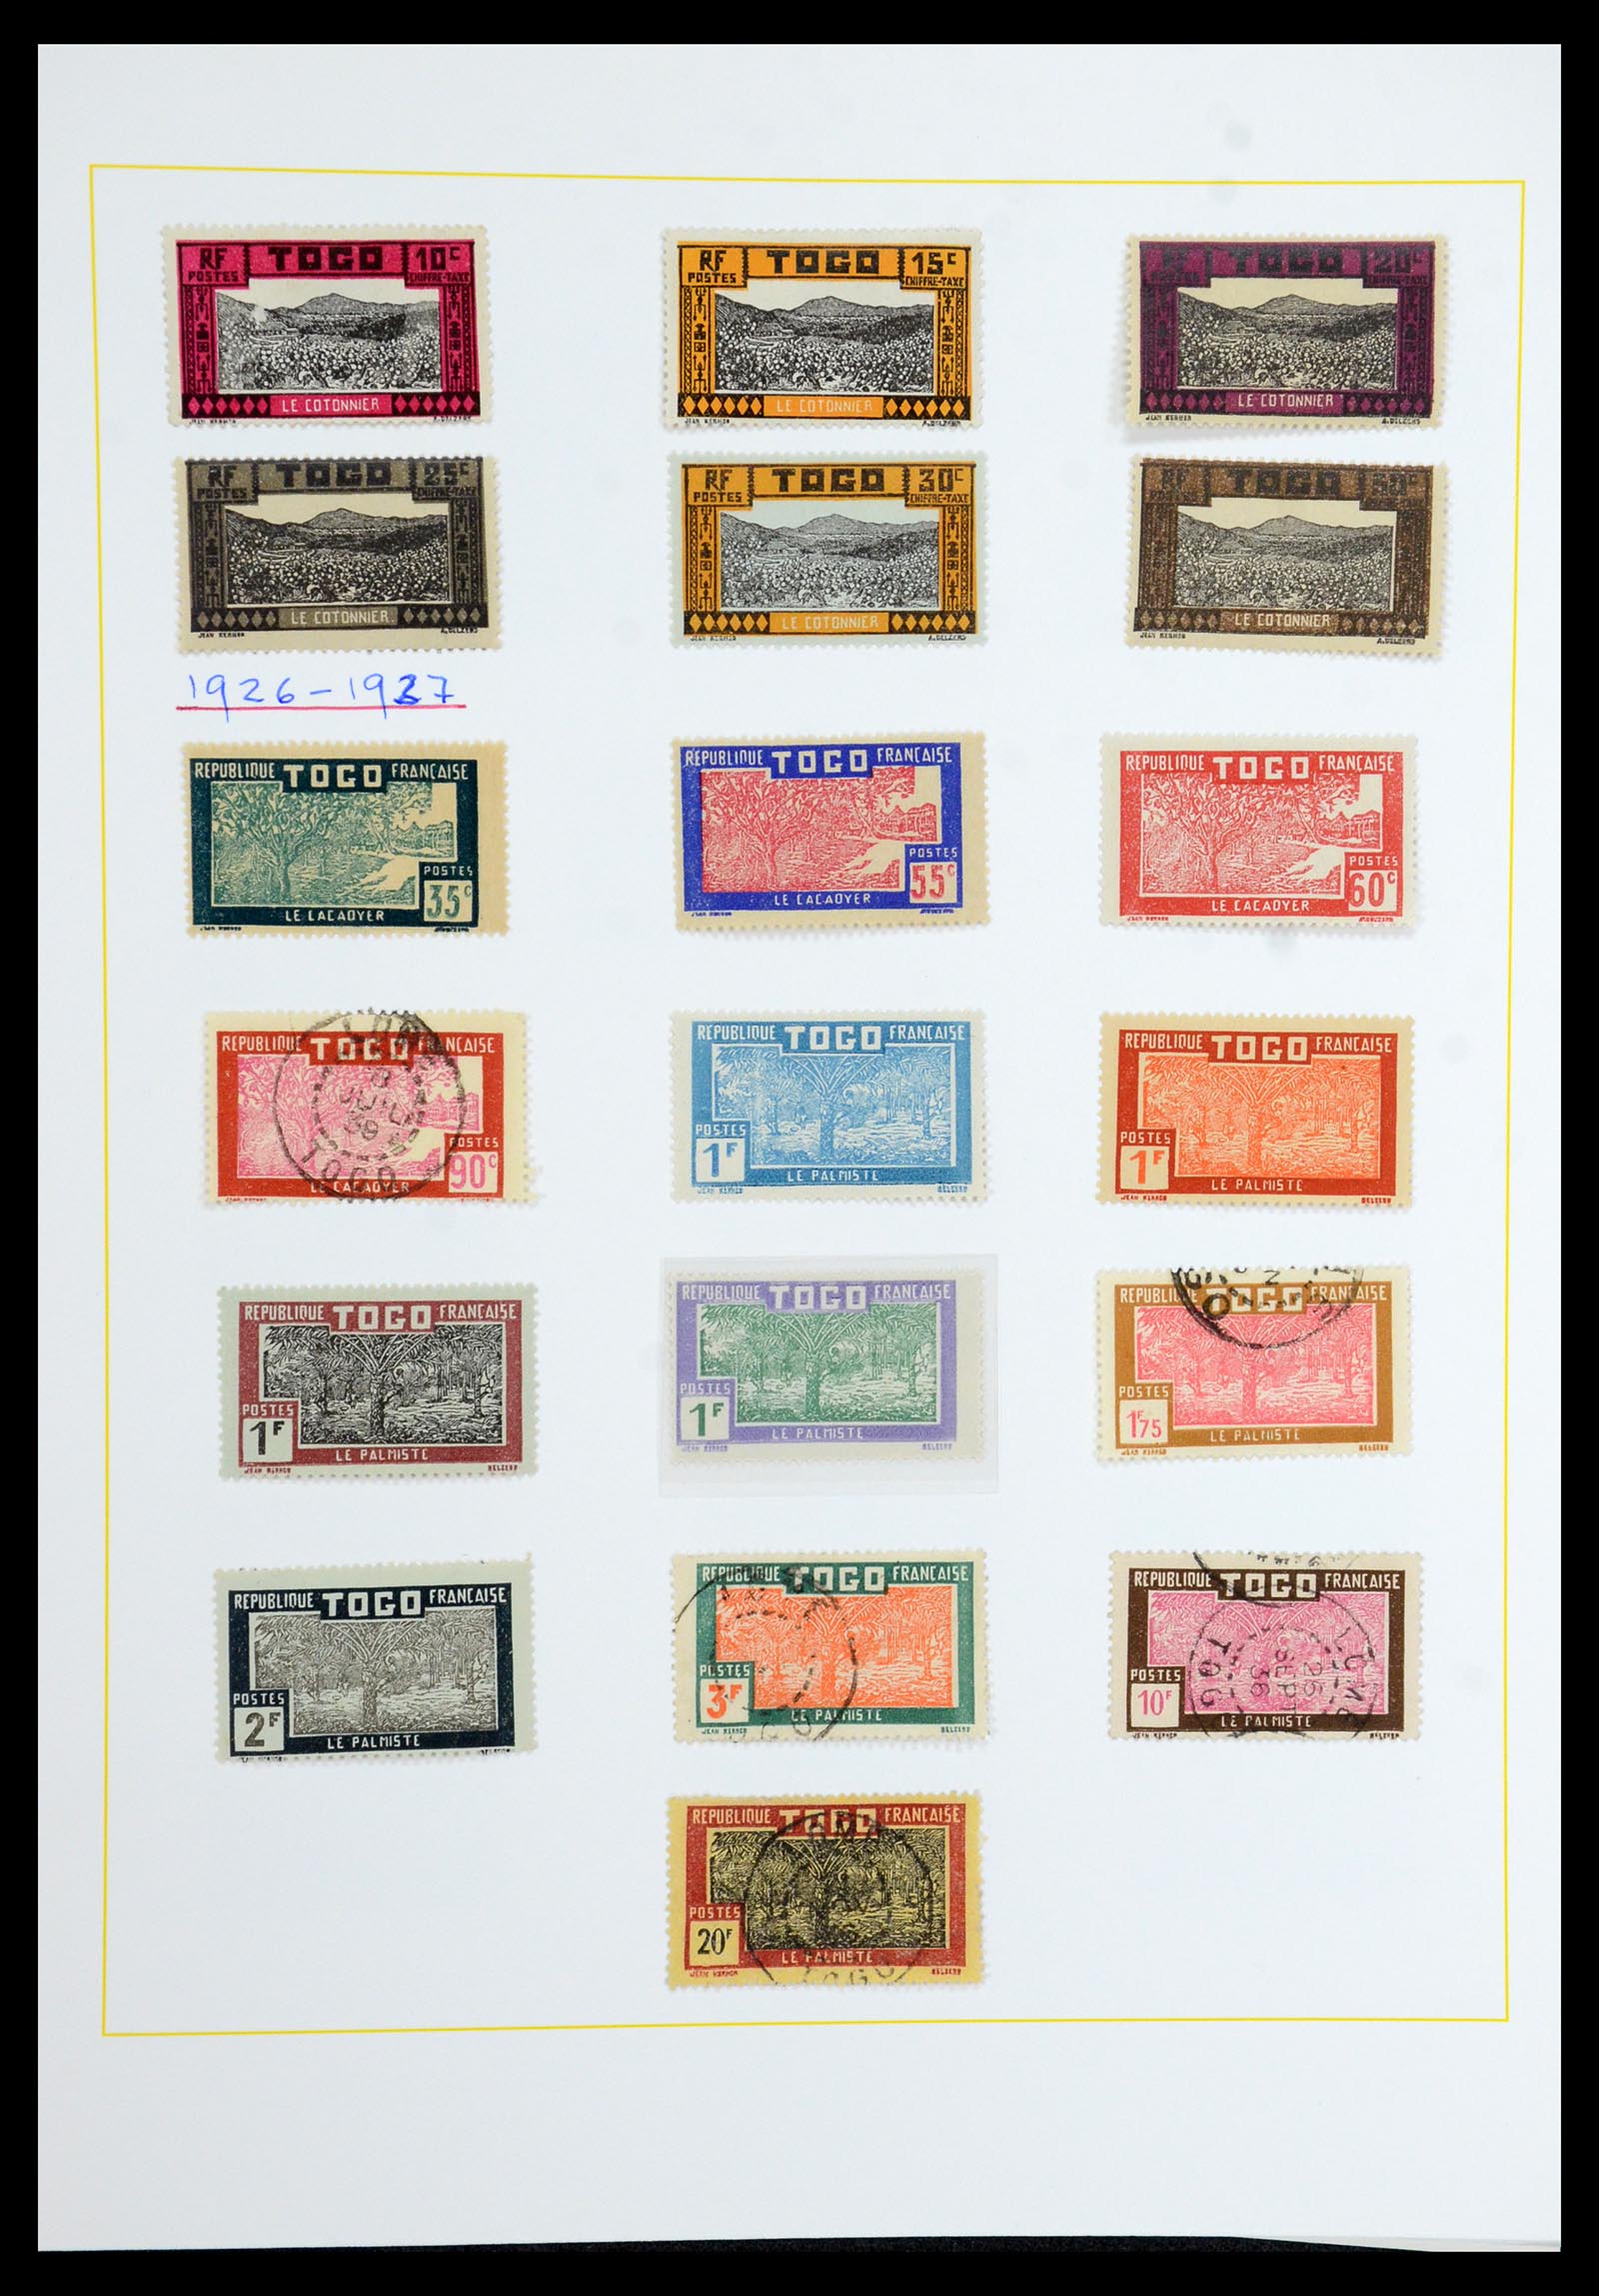 36099 264 - Stamp collection 36099 French coonies 1885-1950.